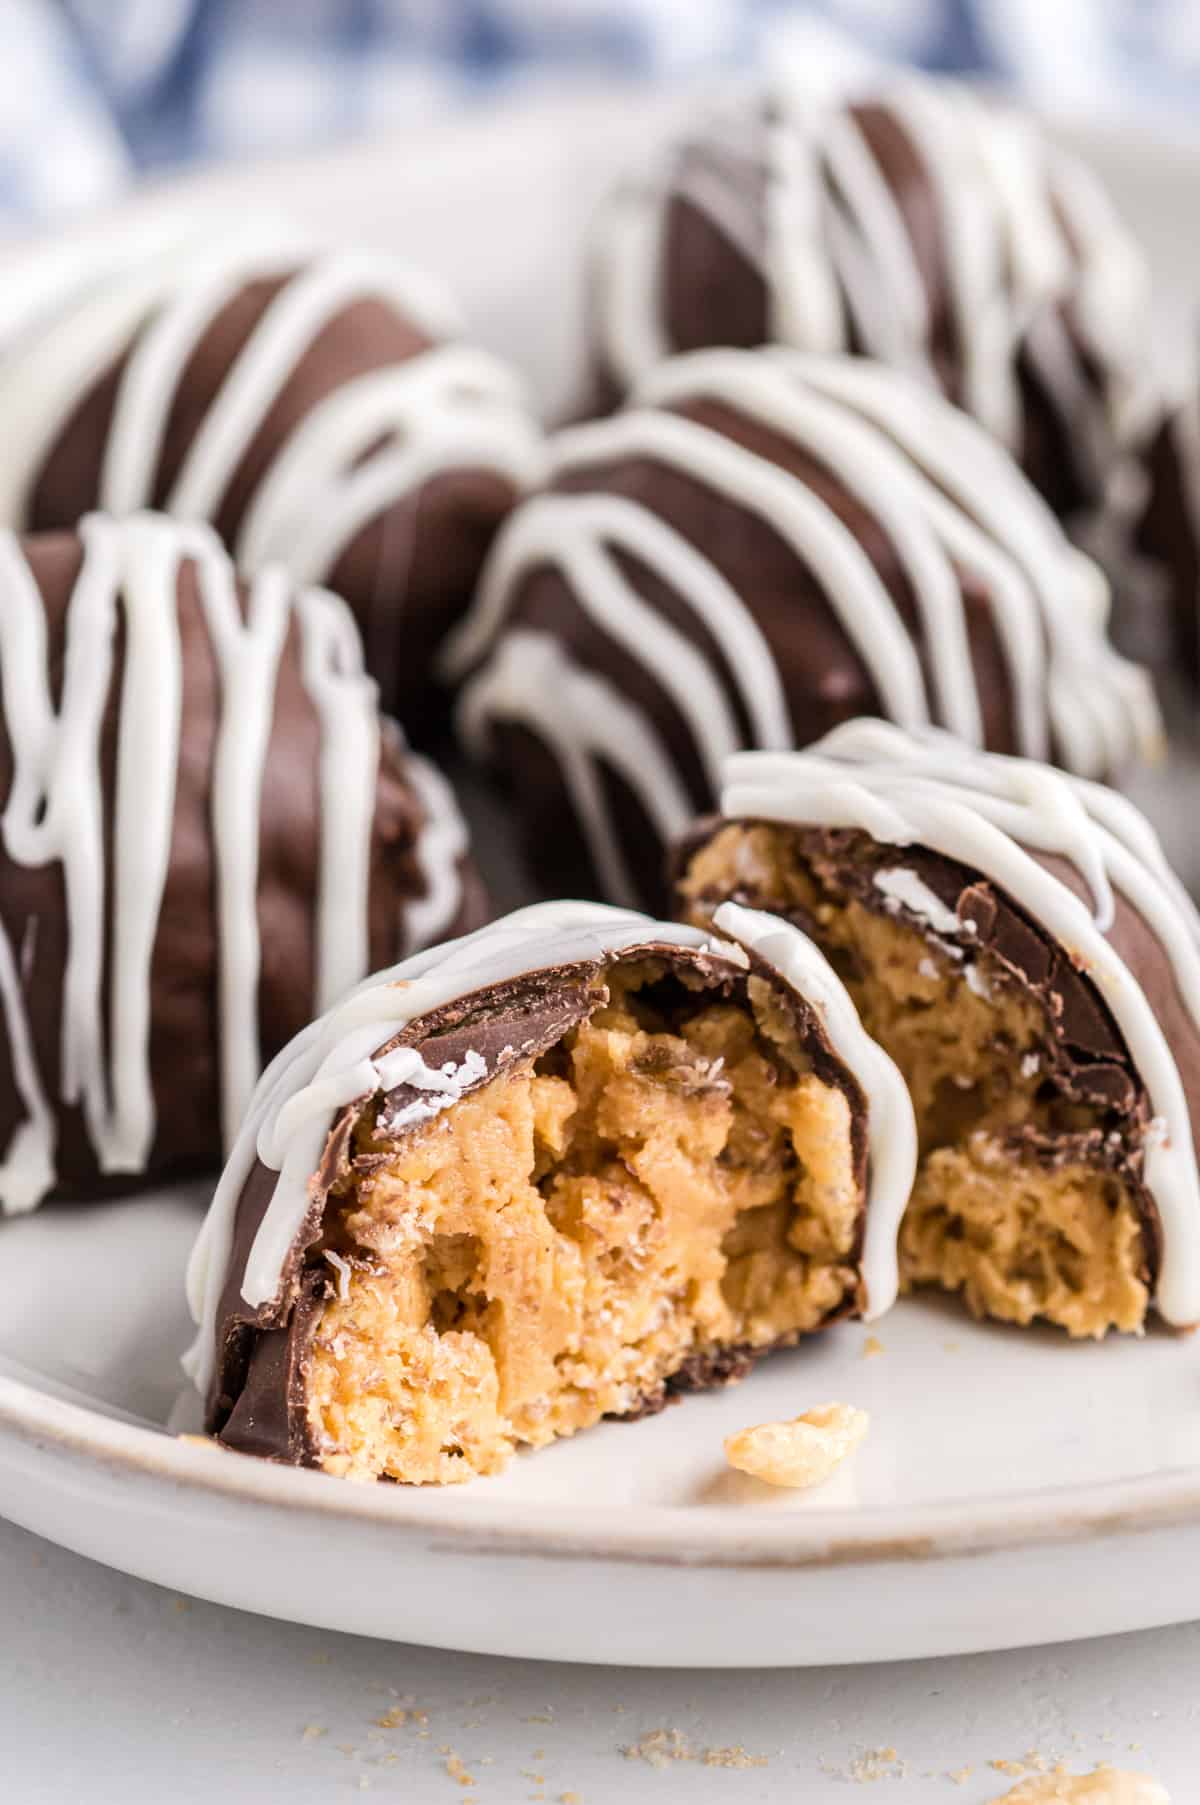 Chocolate Rice Krispie Balls on white plate with one cut in half to show creamy peanut butter and crunchy rice cereal inside.